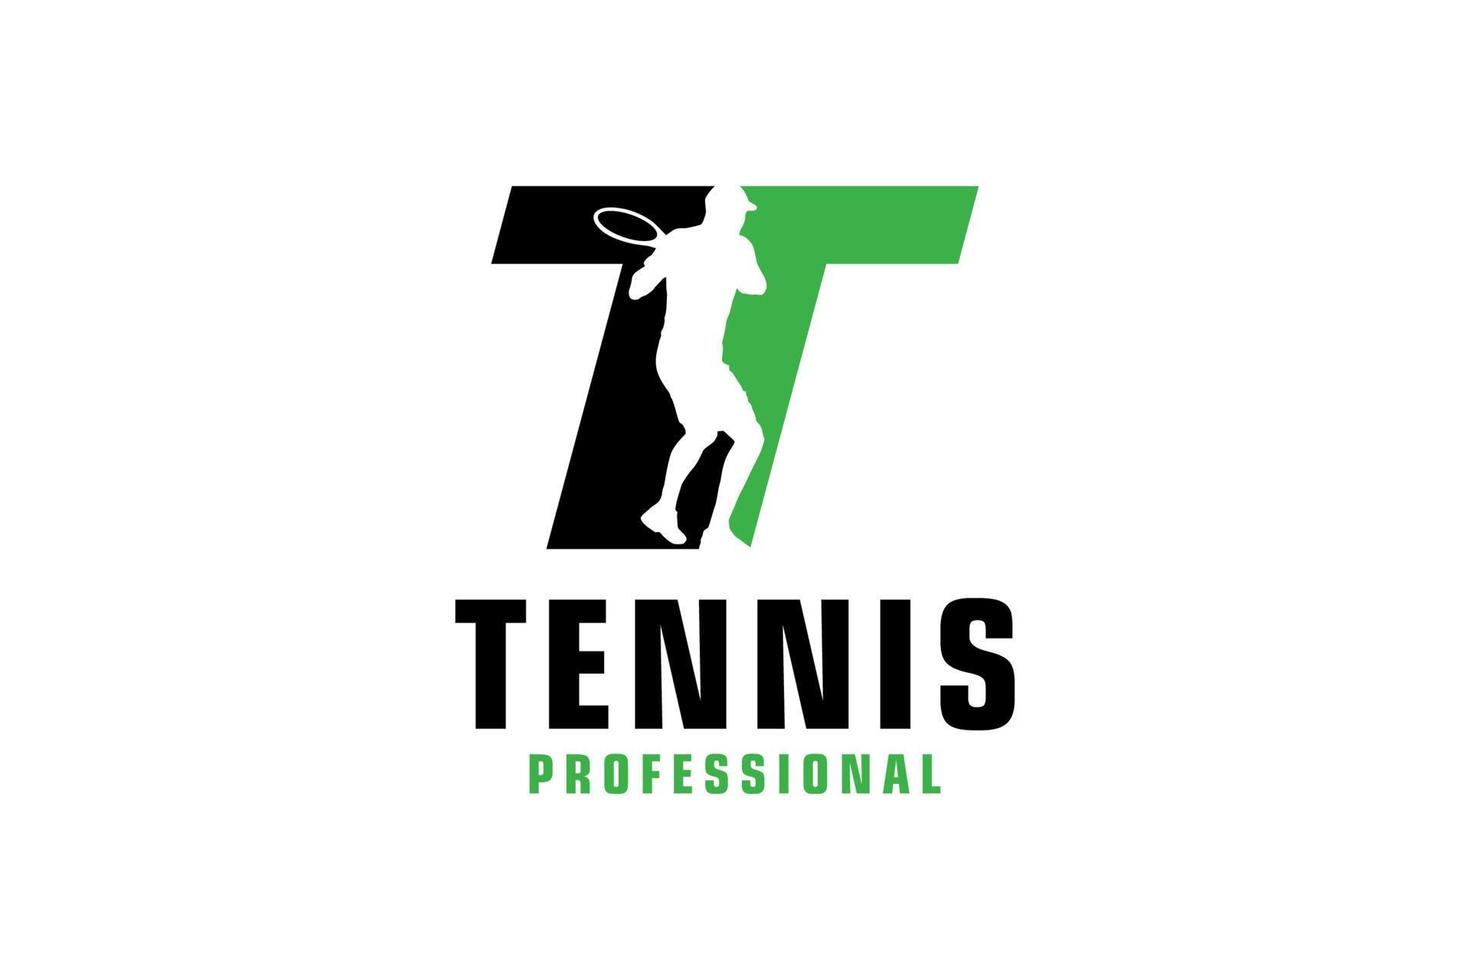 Letter T with Tennis player silhouette Logo Design. Vector Design Template Elements for Sport Team or Corporate Identity.